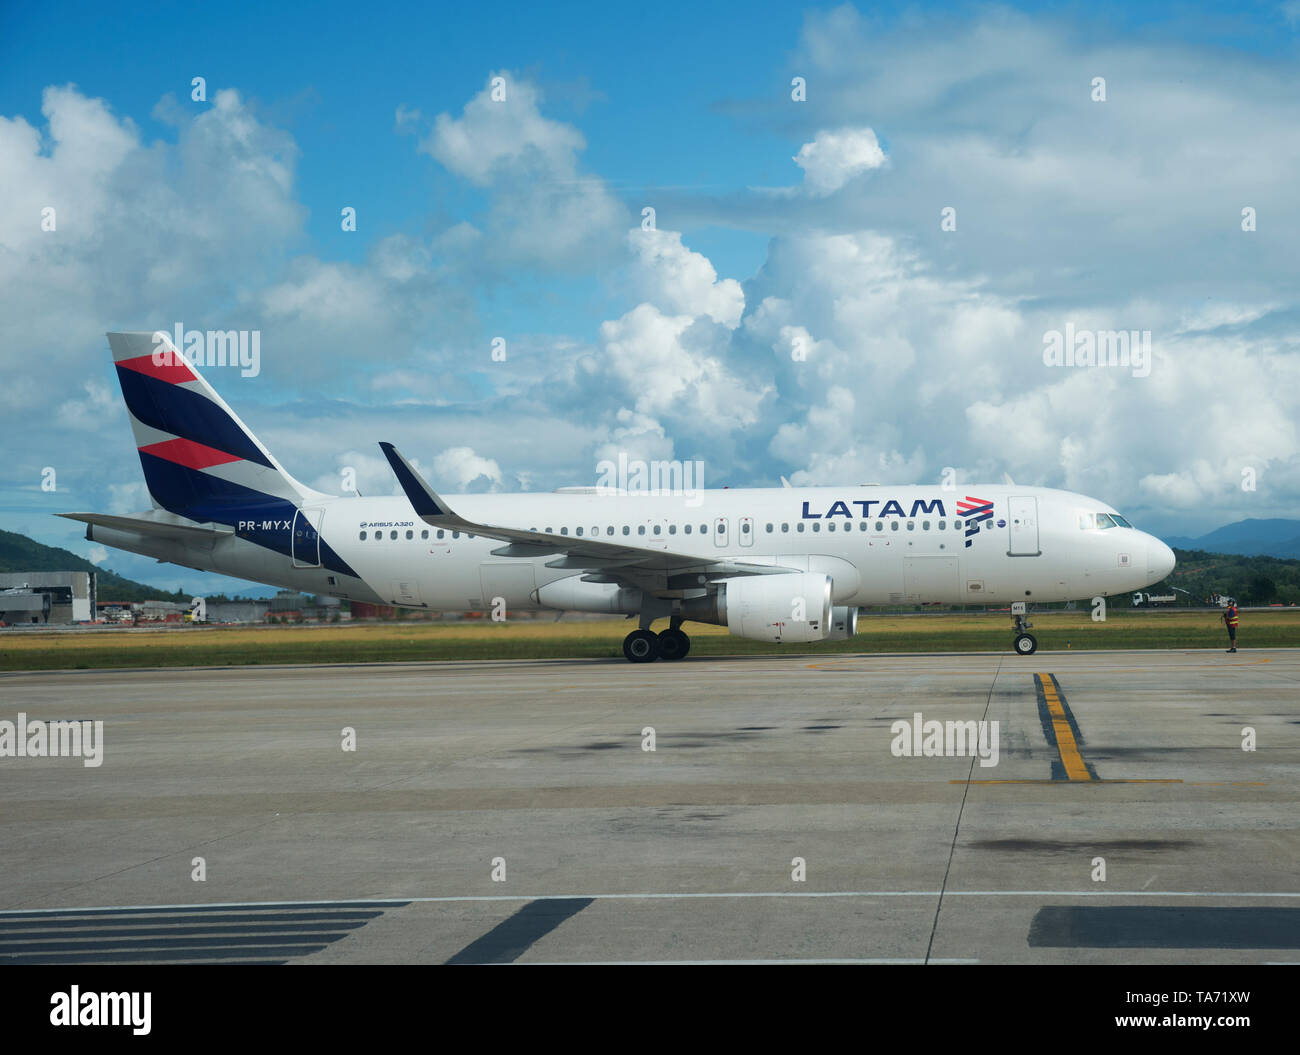 Chapeco - Brazil March 29, 2019 Airplane photo of airline Latam, at the airport in Brazil Stock Photo